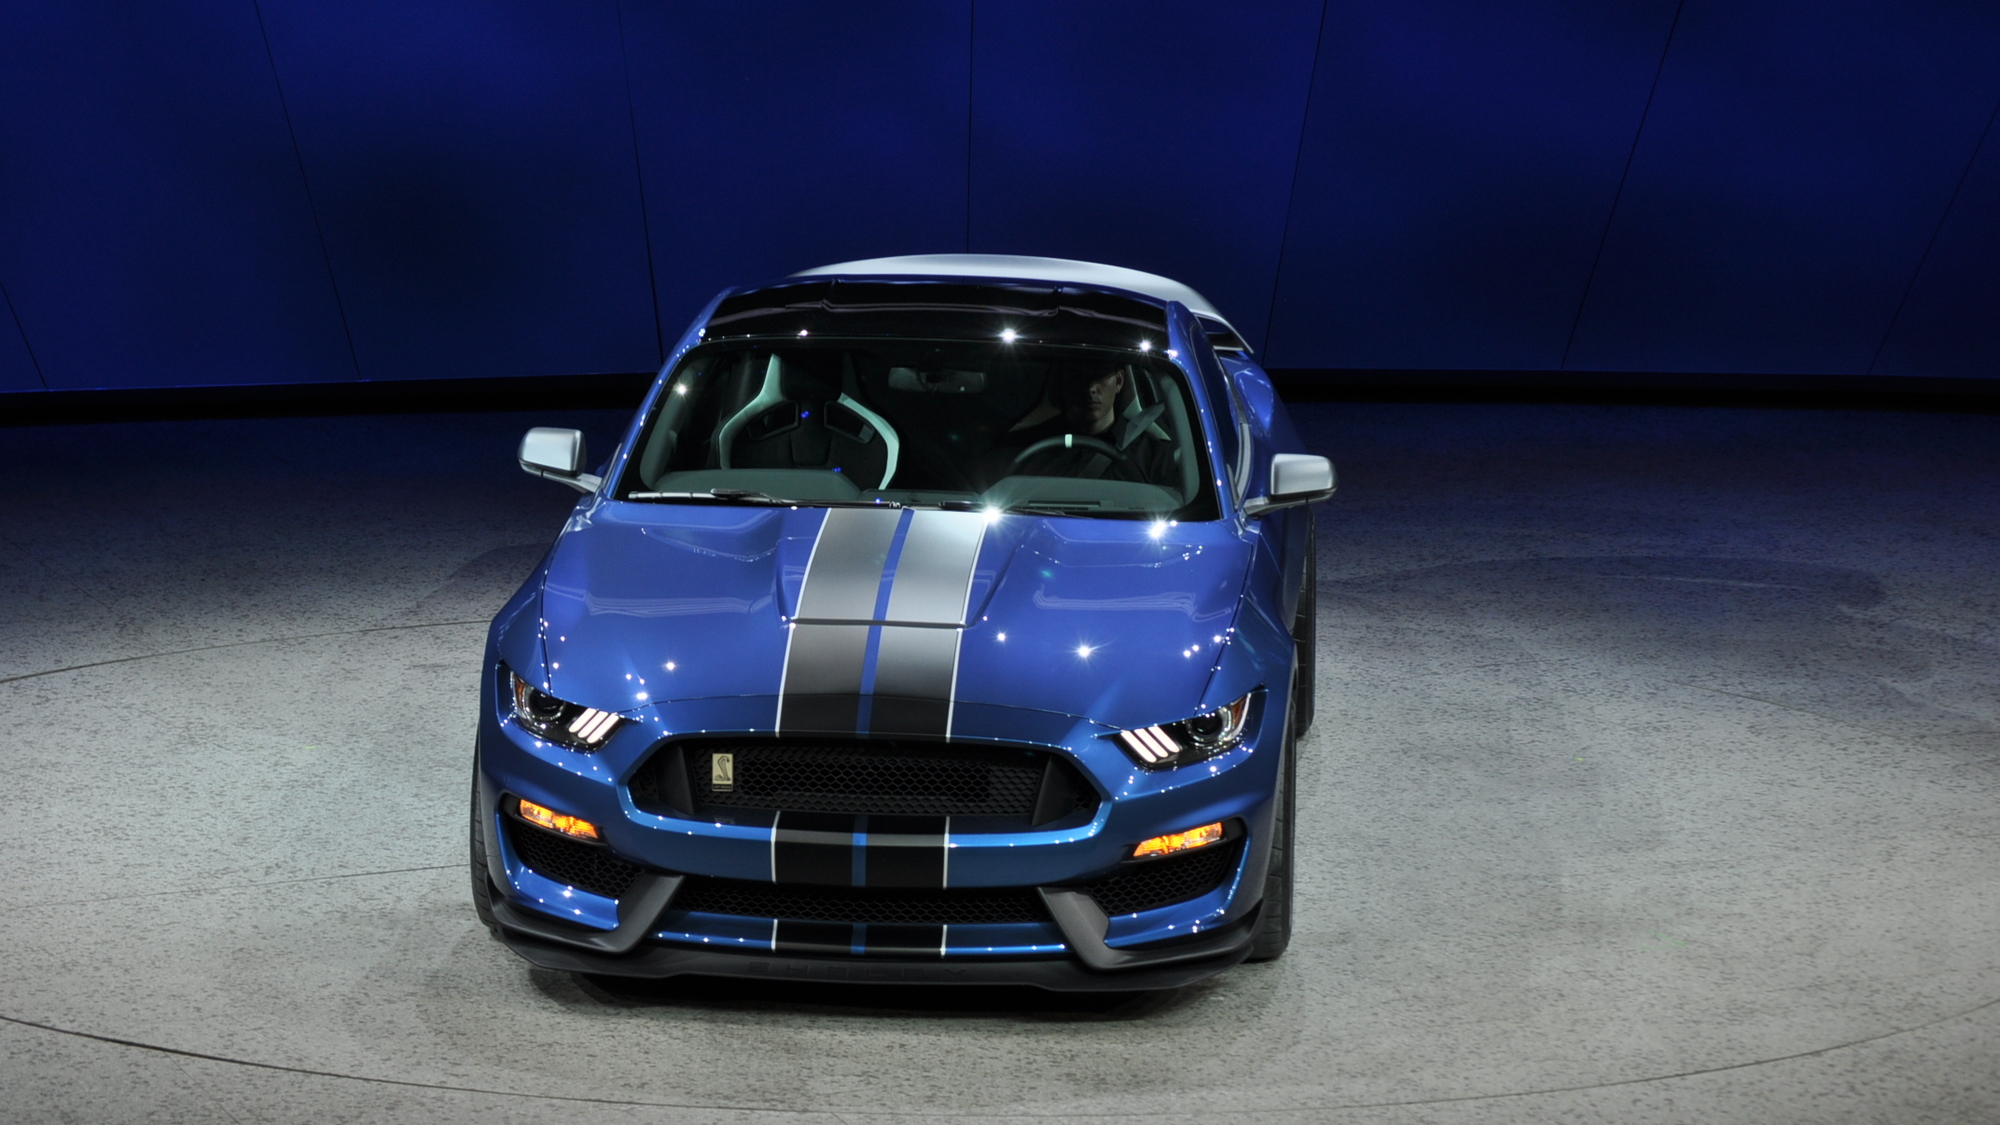 2016 Ford Mustang Shelby GT350R, 2015 Detroit Auto Show